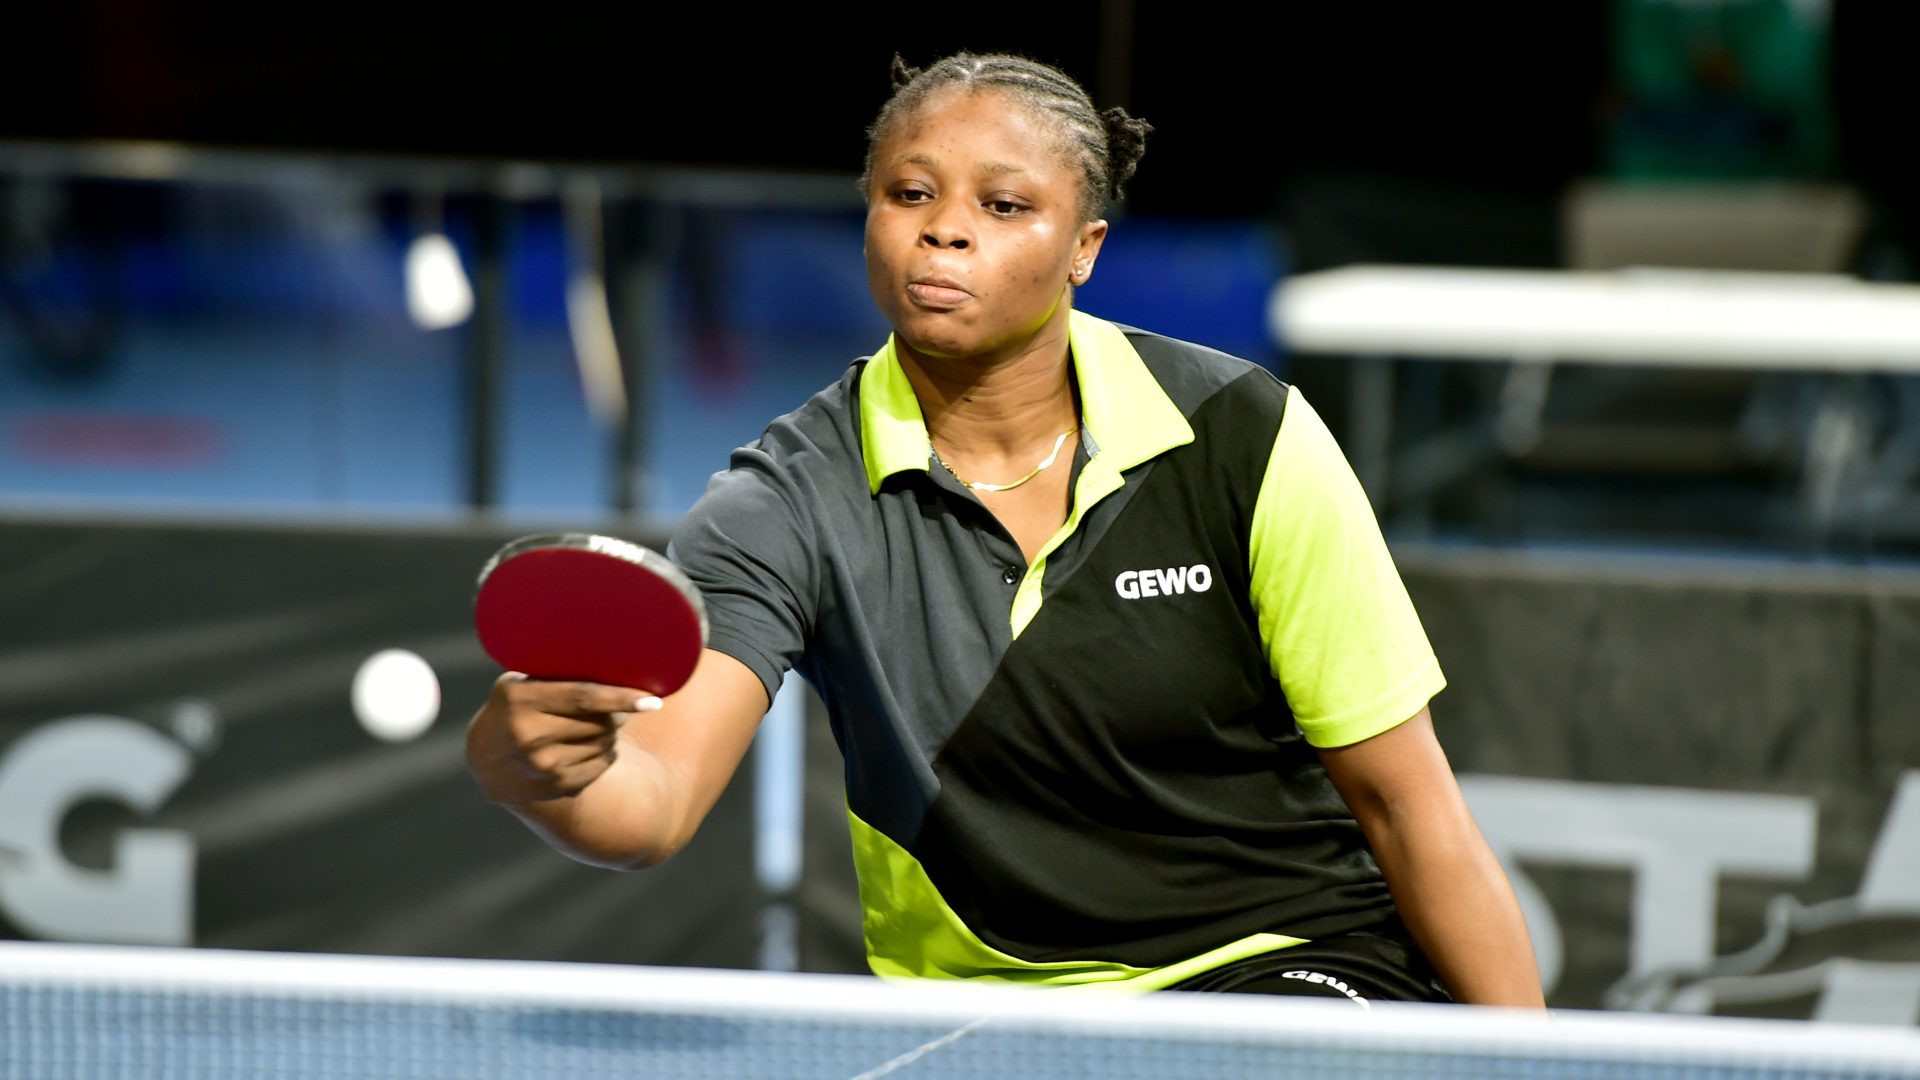 Ifechunkude Ikpeoyi pipped compatriot Chinenye Obiora in the women's singles class 4-5 ©African Table Tennis Federation